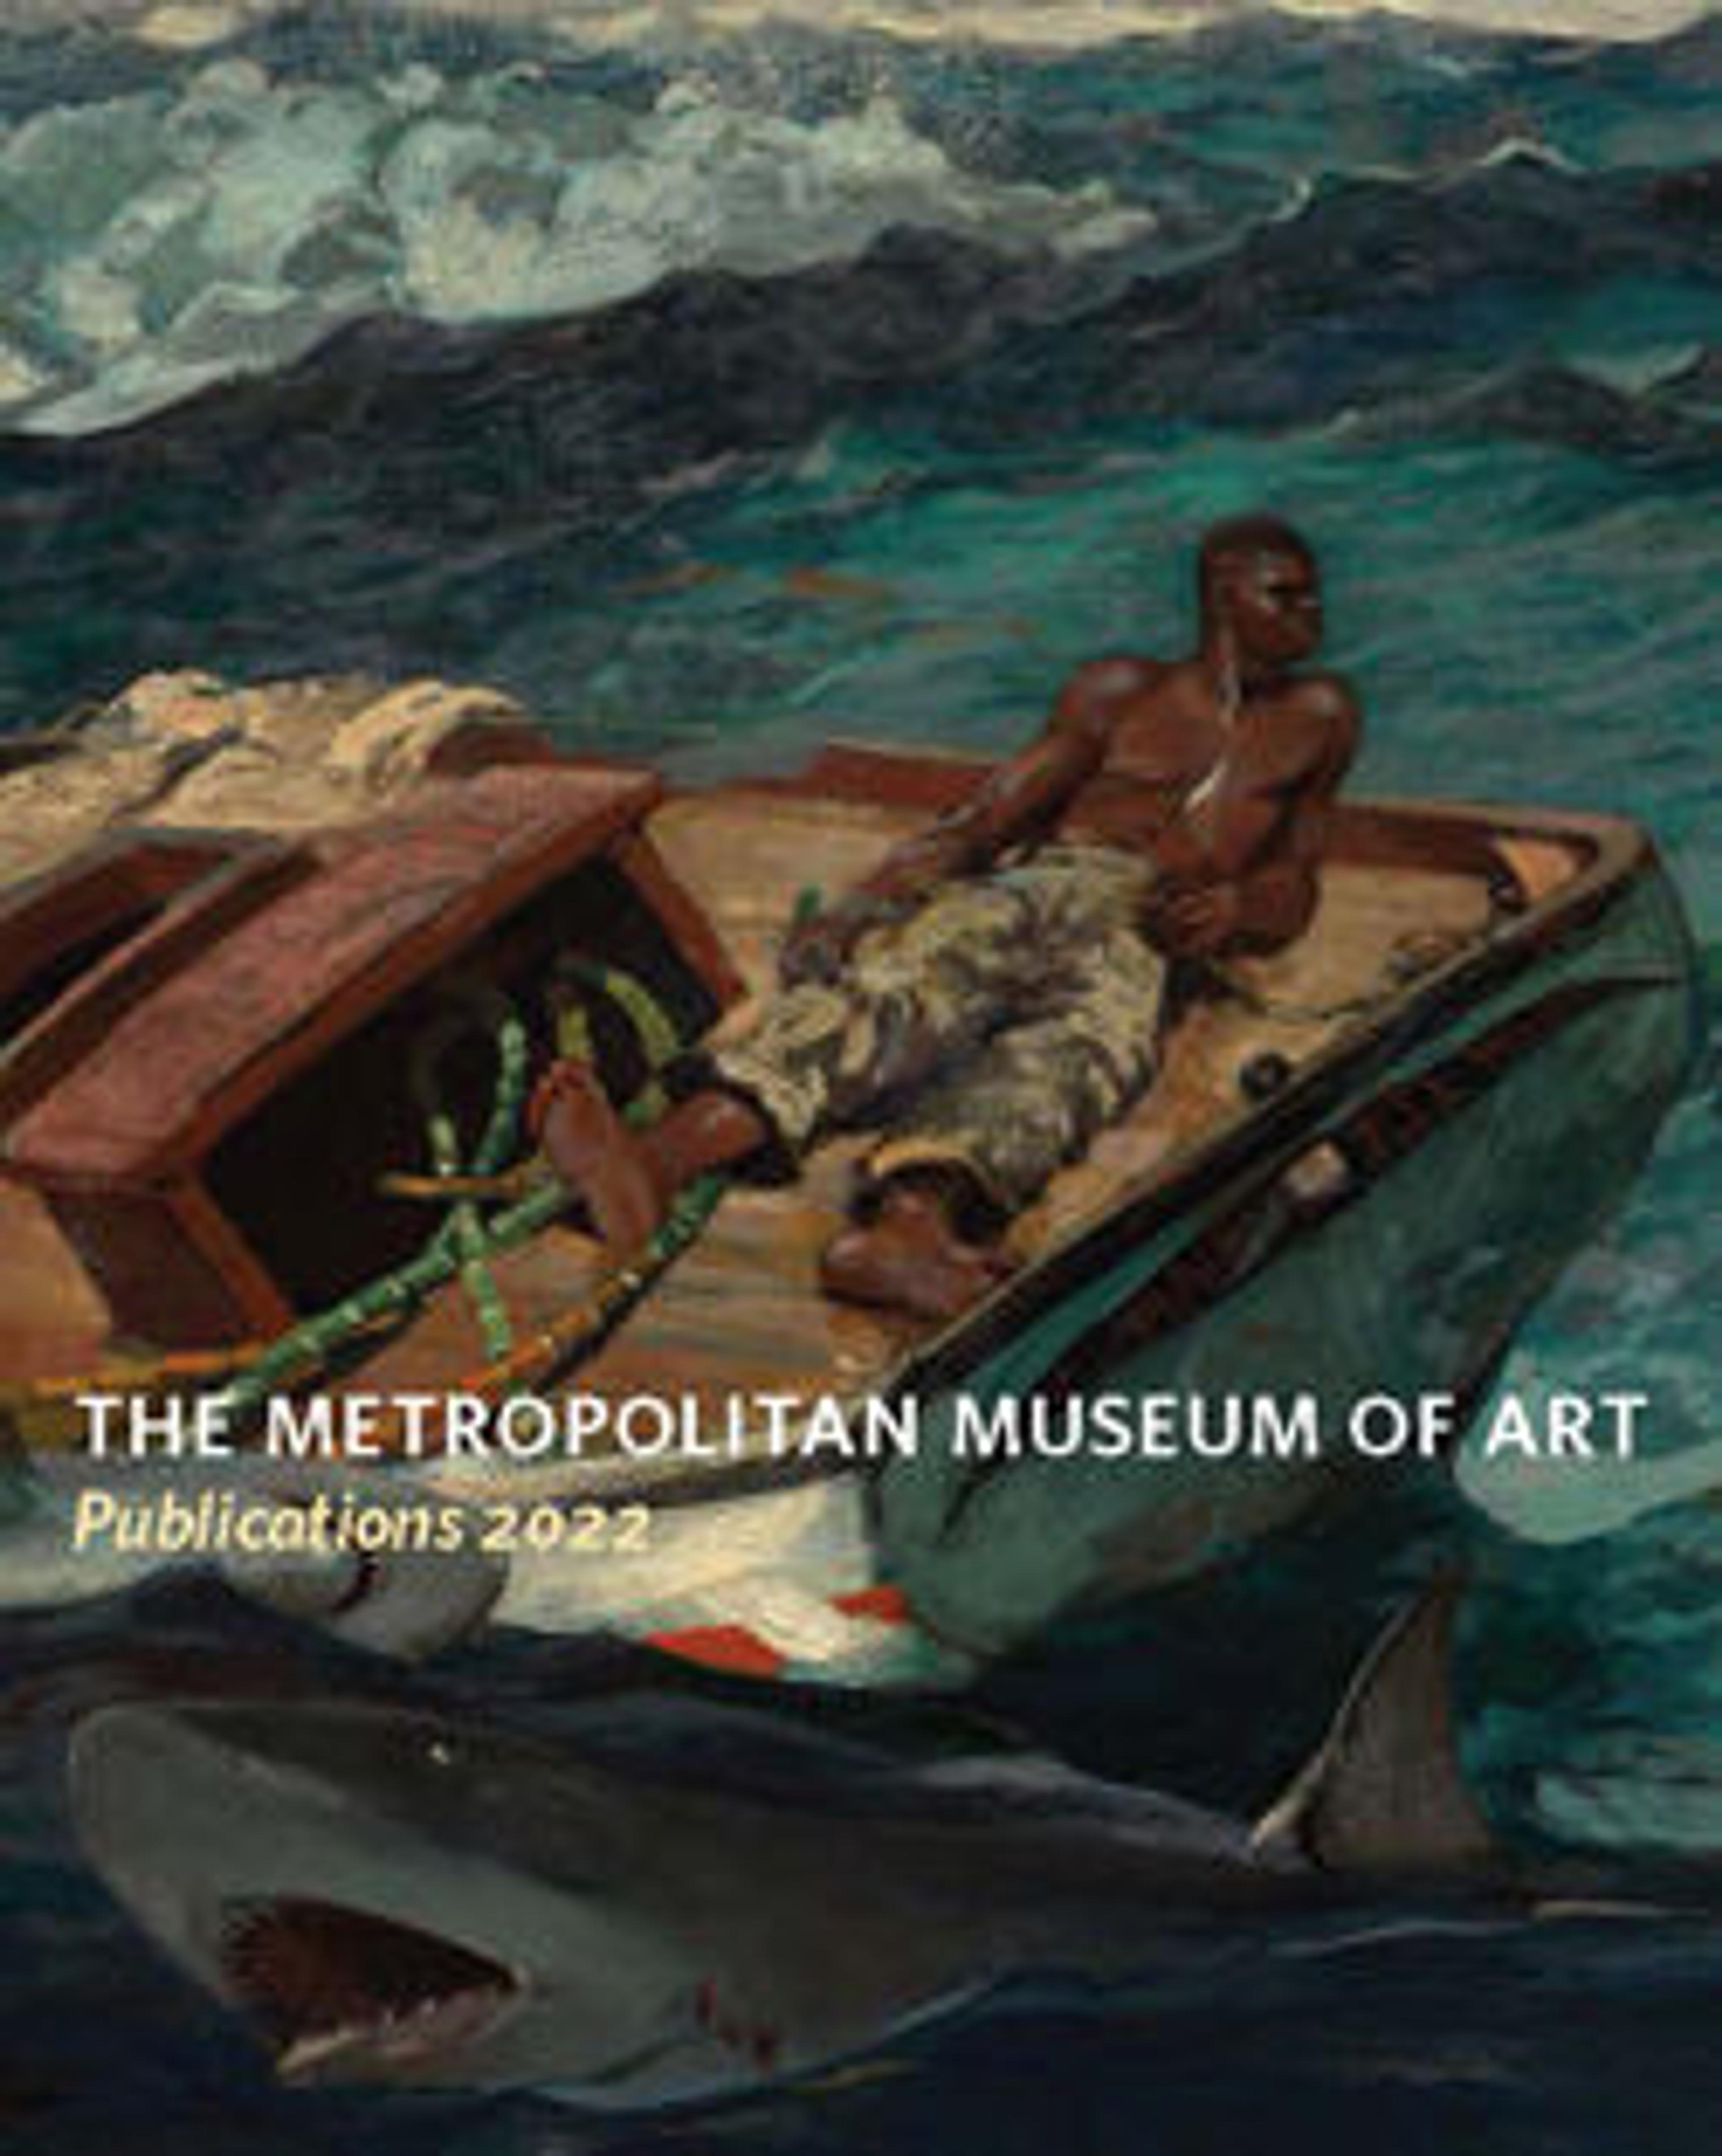 The Metropolitan Museum of Art: Publications 2022 is written across a cropped version of Winslow Homer's painting, The Gulf Stream. The painting depicts a shirtless Black man wearing long tan pants lays propped on a small boa that is tipping toward its side on rough, wavy sea. Two sharks with open mouths circle near the boat. There is blood in the water and on one of the sharks' flanks.